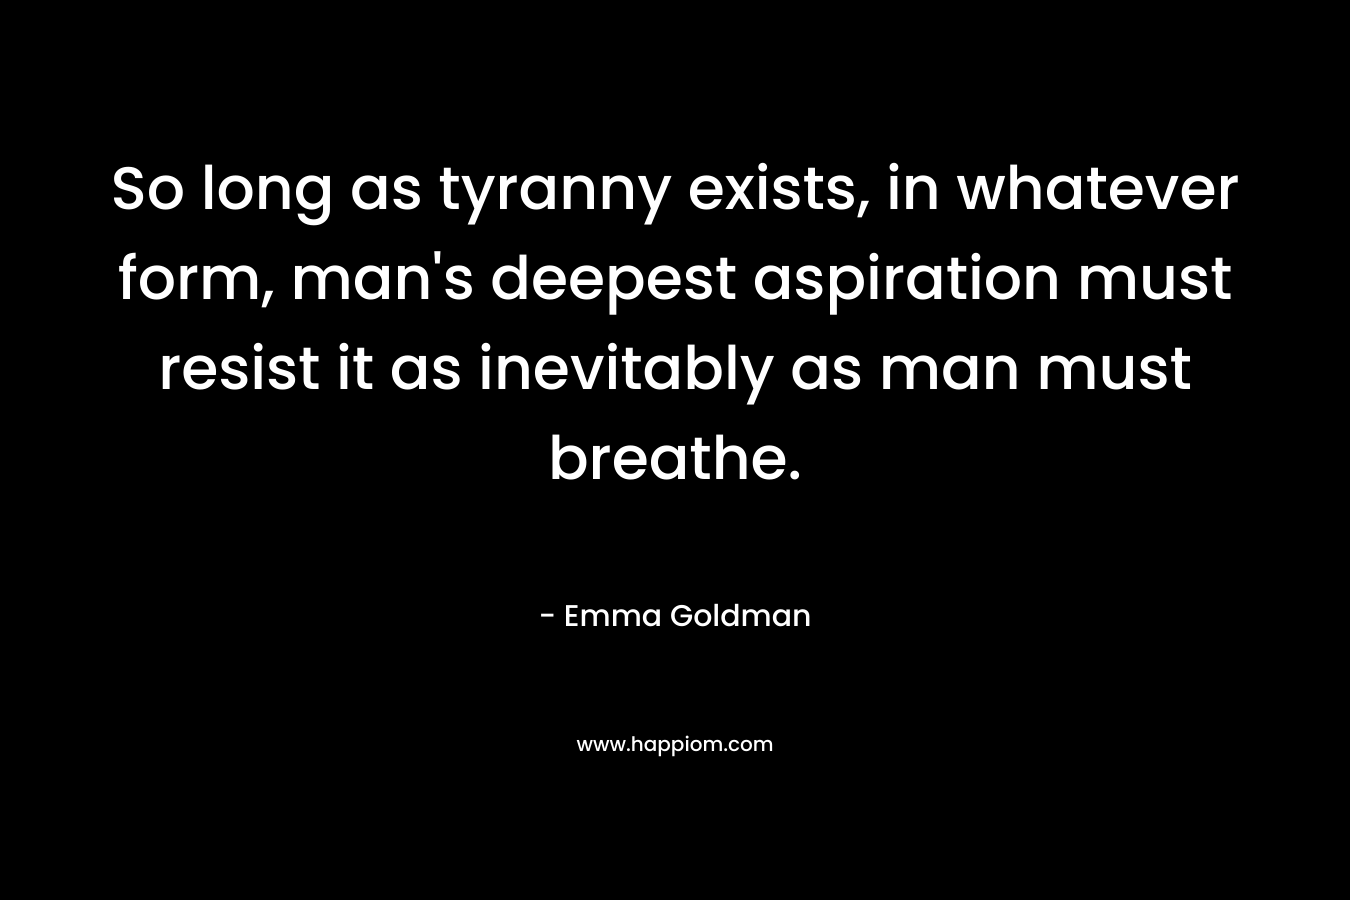 So long as tyranny exists, in whatever form, man’s deepest aspiration must resist it as inevitably as man must breathe. – Emma Goldman